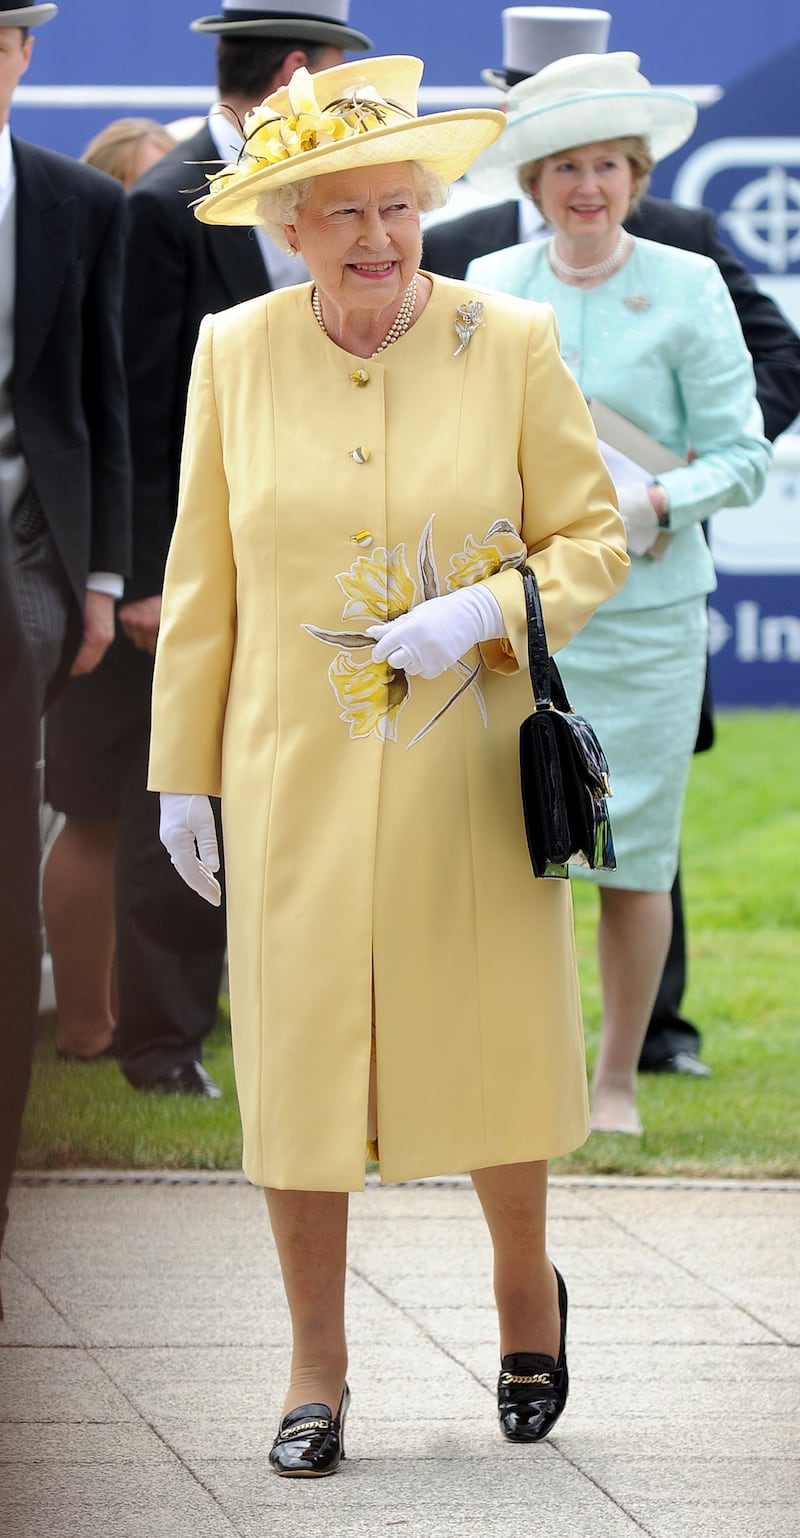 Queen Elizabeth II, wearing yellow, attends Derby Day of the Epsom Derby on June 5, 2010, in Epsom, England. Getty Images